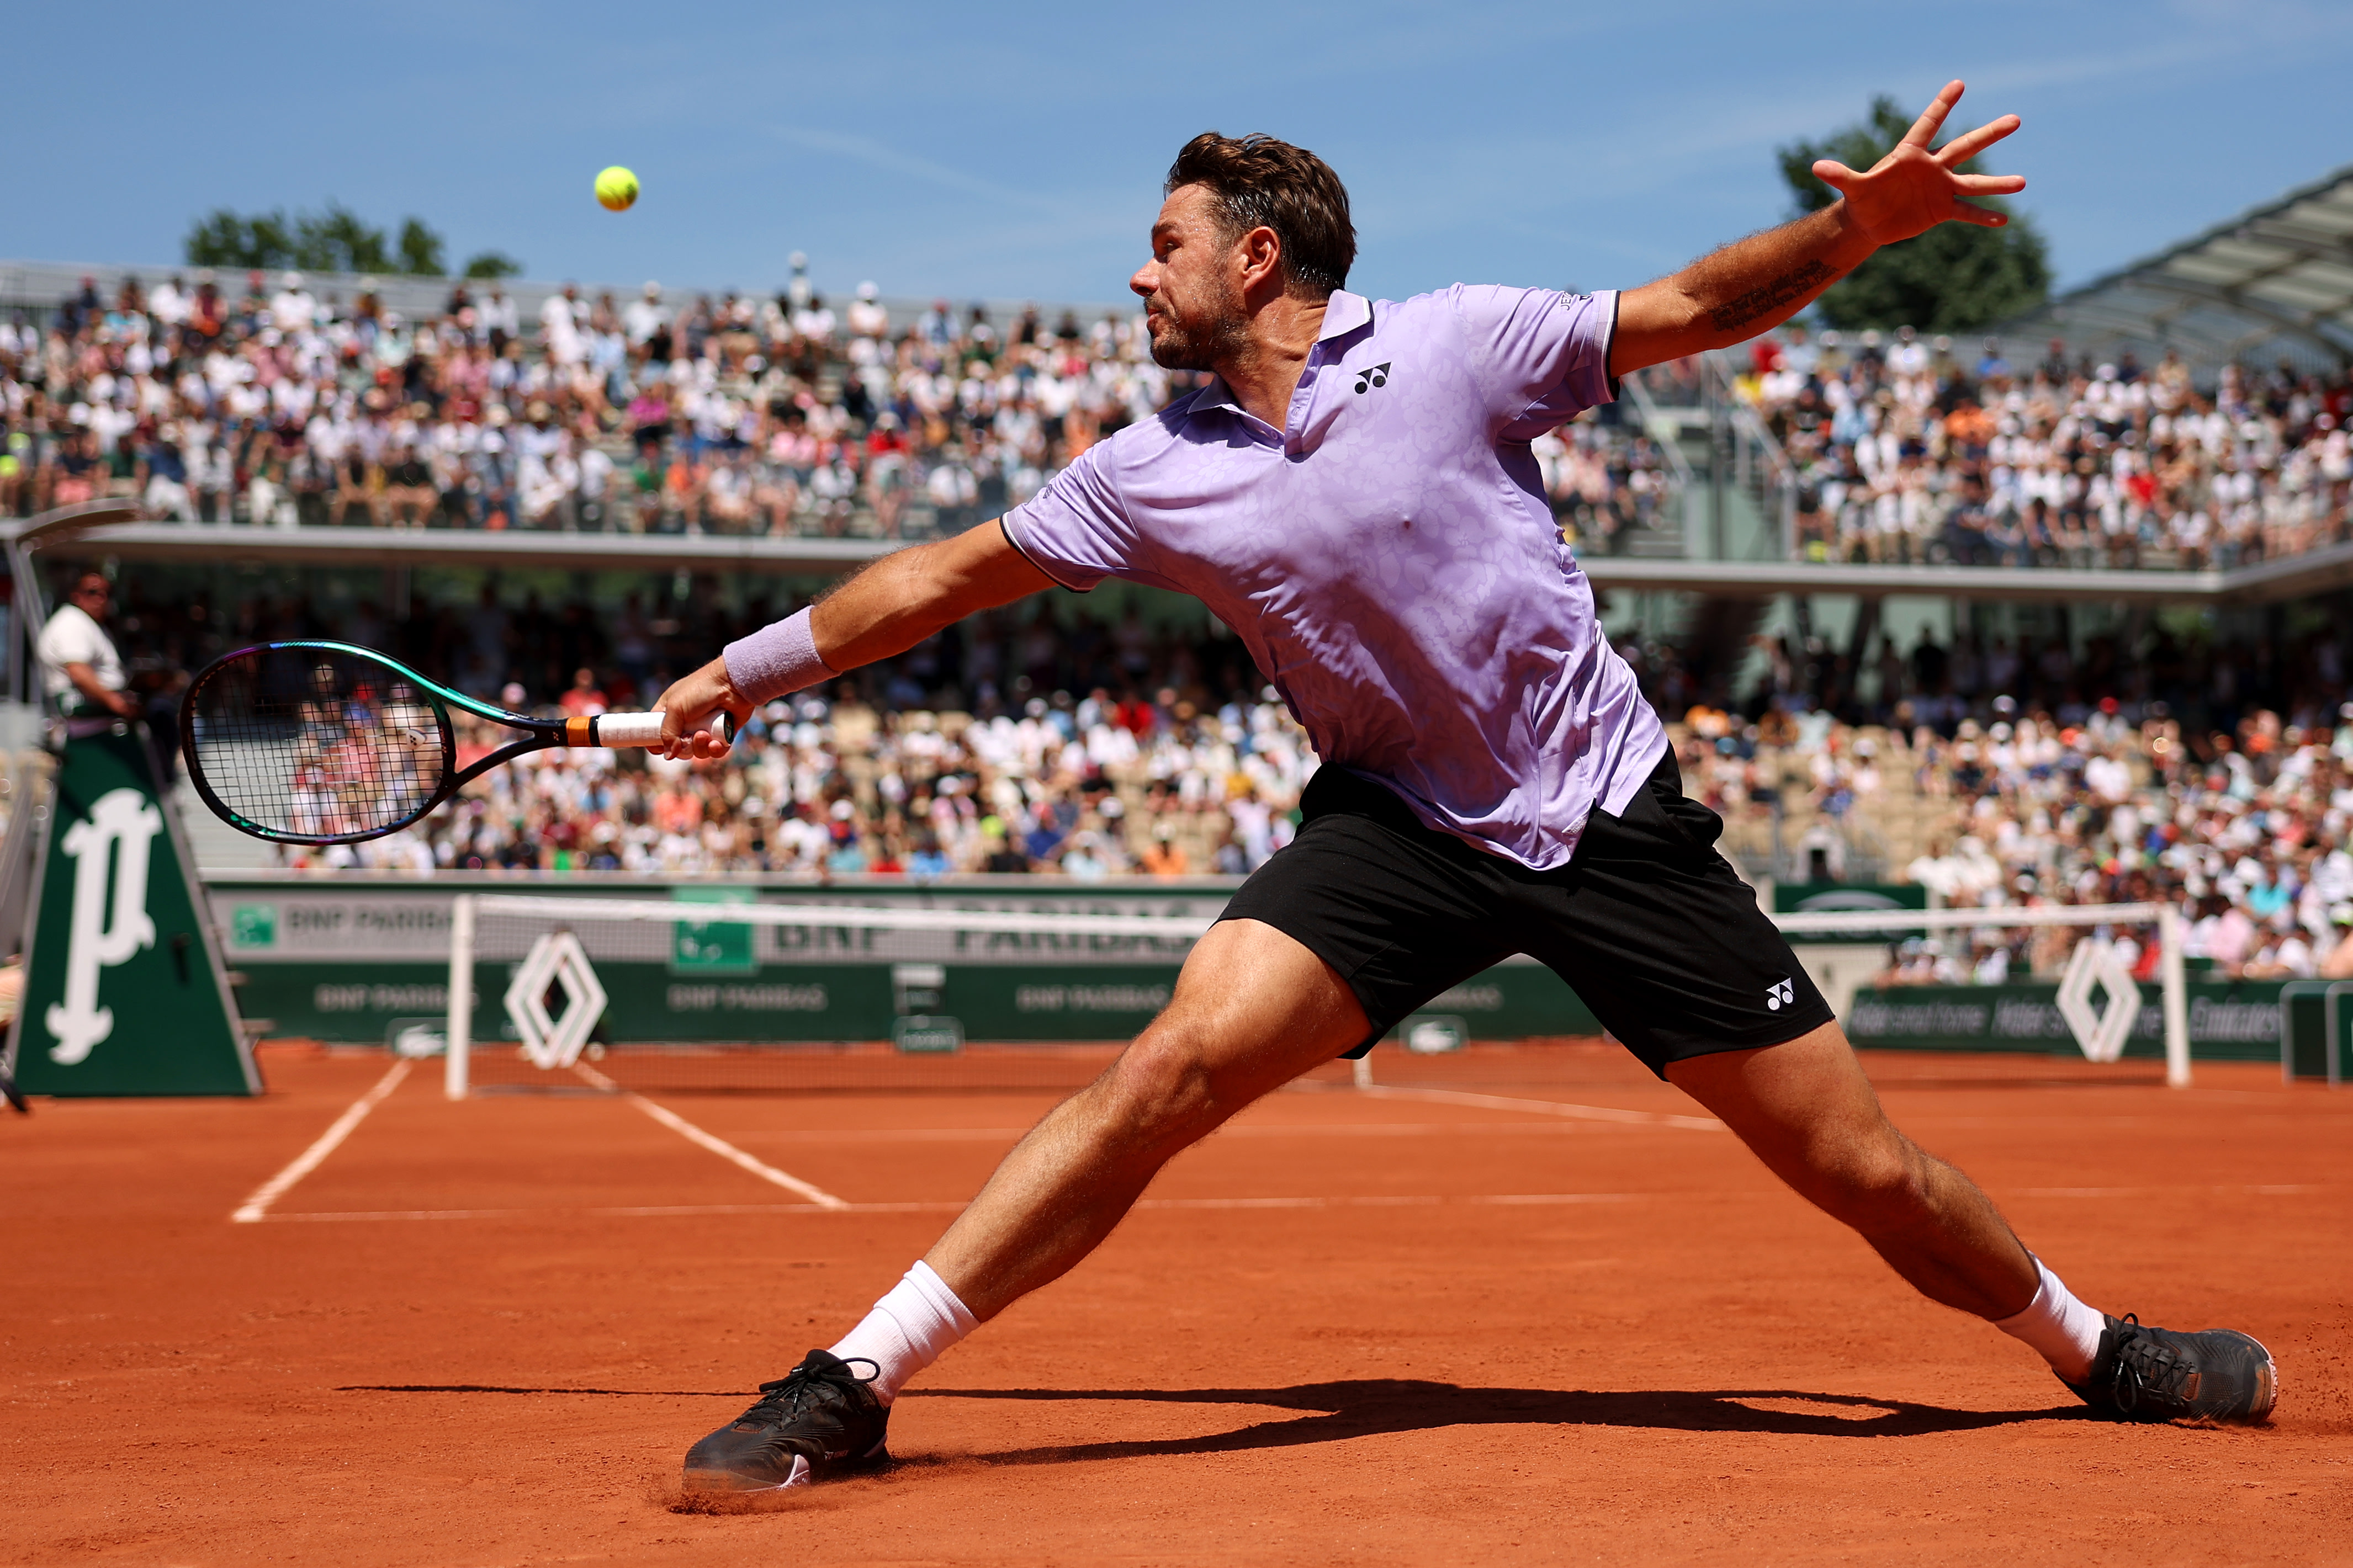 It was leg day for Stan Wawrinka, who fell in five but again defined success at Roland Garros